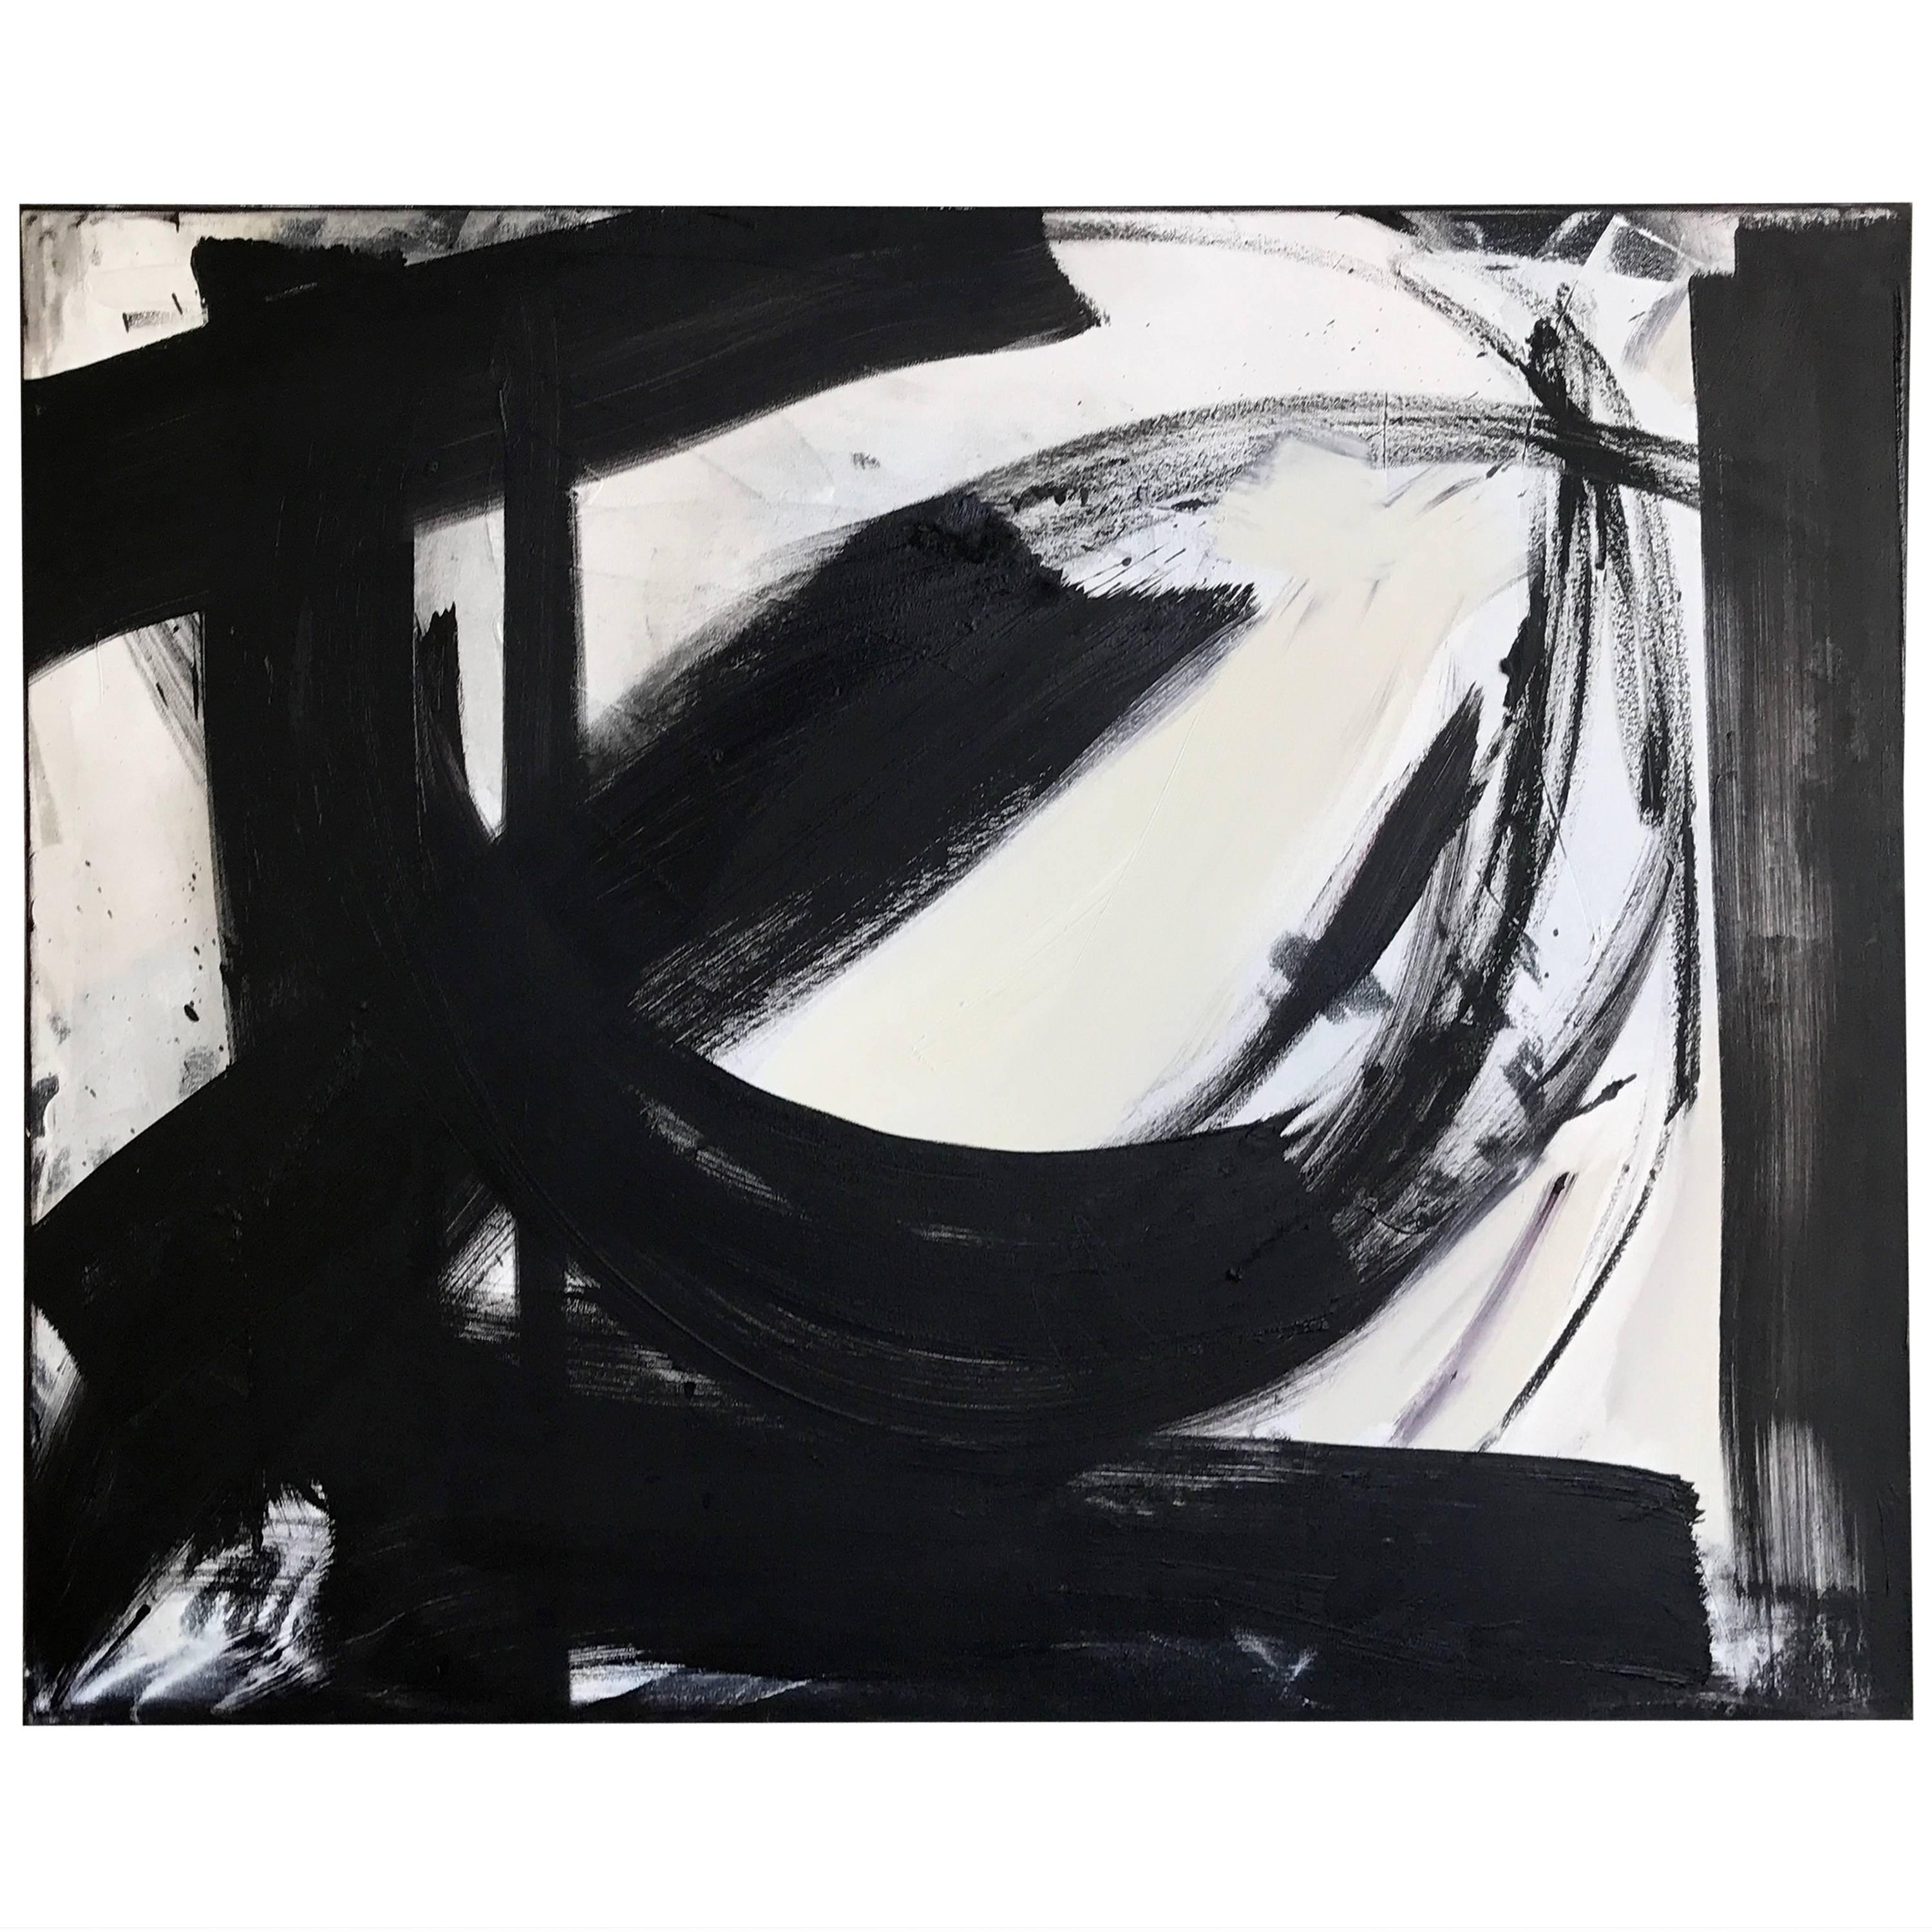 B&W Abstract by Palm Springs Artist Donald Lloyd Smith